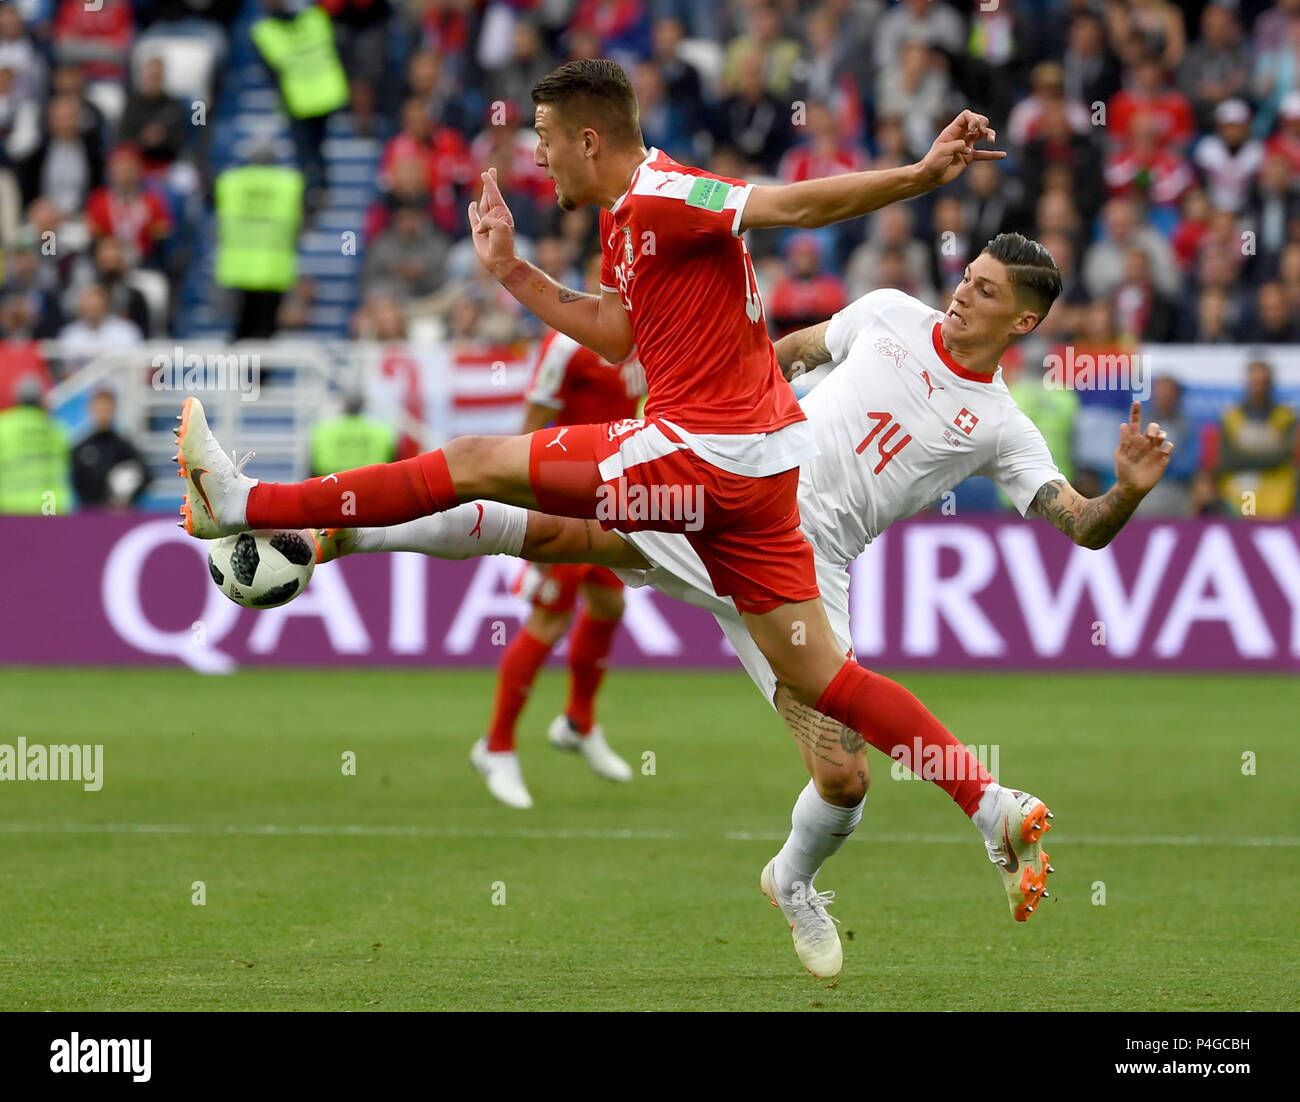 Kaliningrad, Russia. 22nd June, 2018. Steven Zuber (R) of Switzerland competes during the 2018 FIFA World Cup Group E match between Switzerland and Serbia in Kaliningrad, Russia, June 22, 2018. Credit: Chen Cheng/Xinhua/Alamy Live News Stock Photo